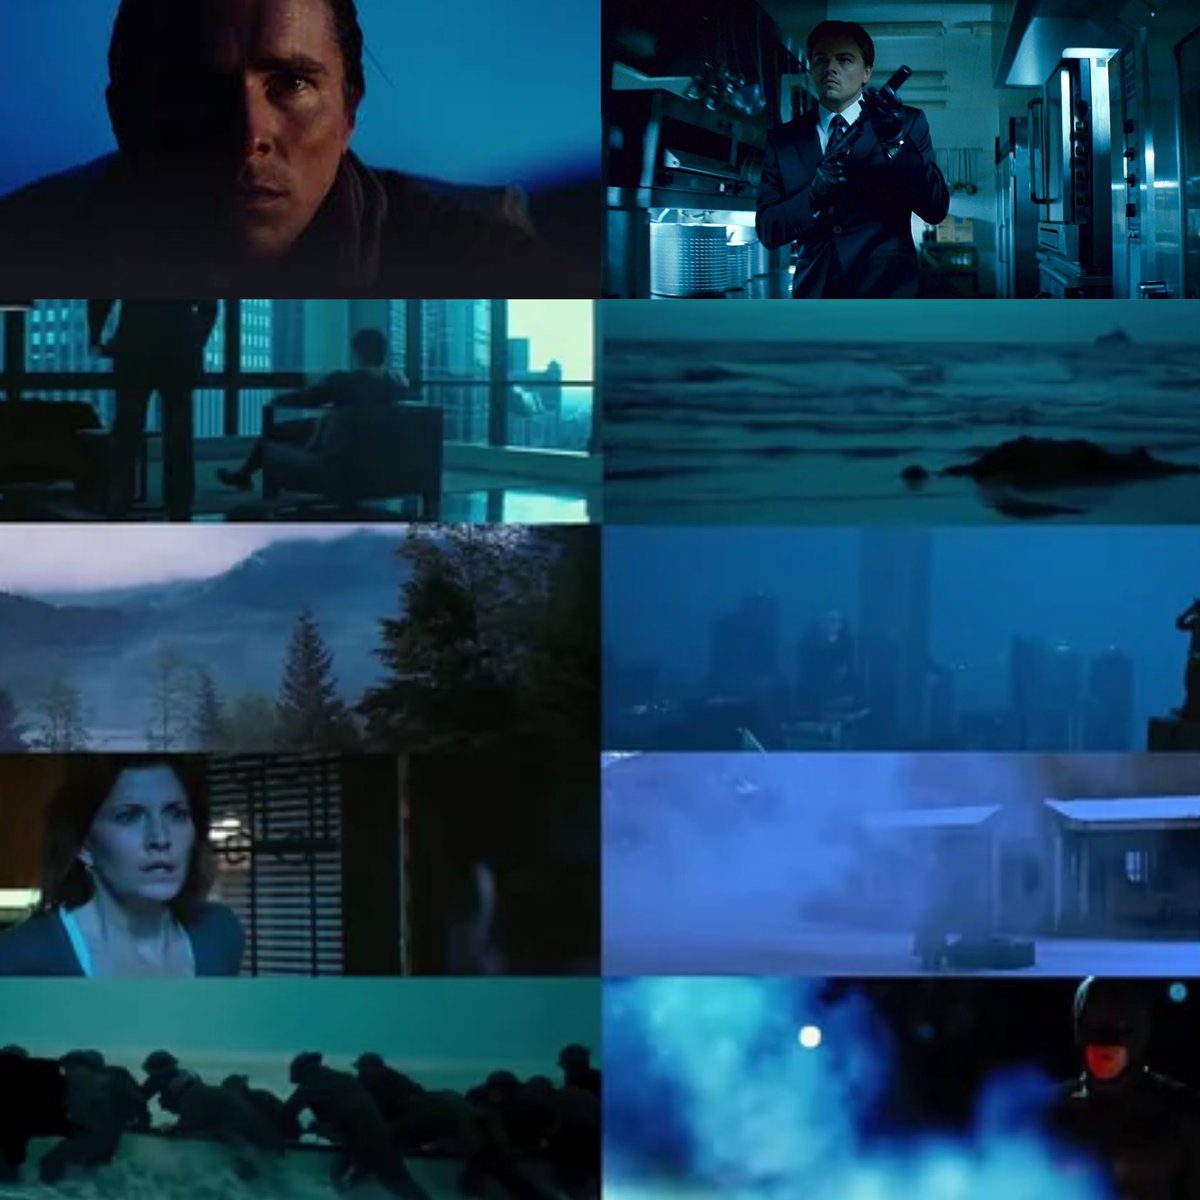 Did you know? Christopher Nolan and his brother Jonathan Nolan are both red-green color blind. This is why their films often have blue tint and use of blue shades in most of their shots